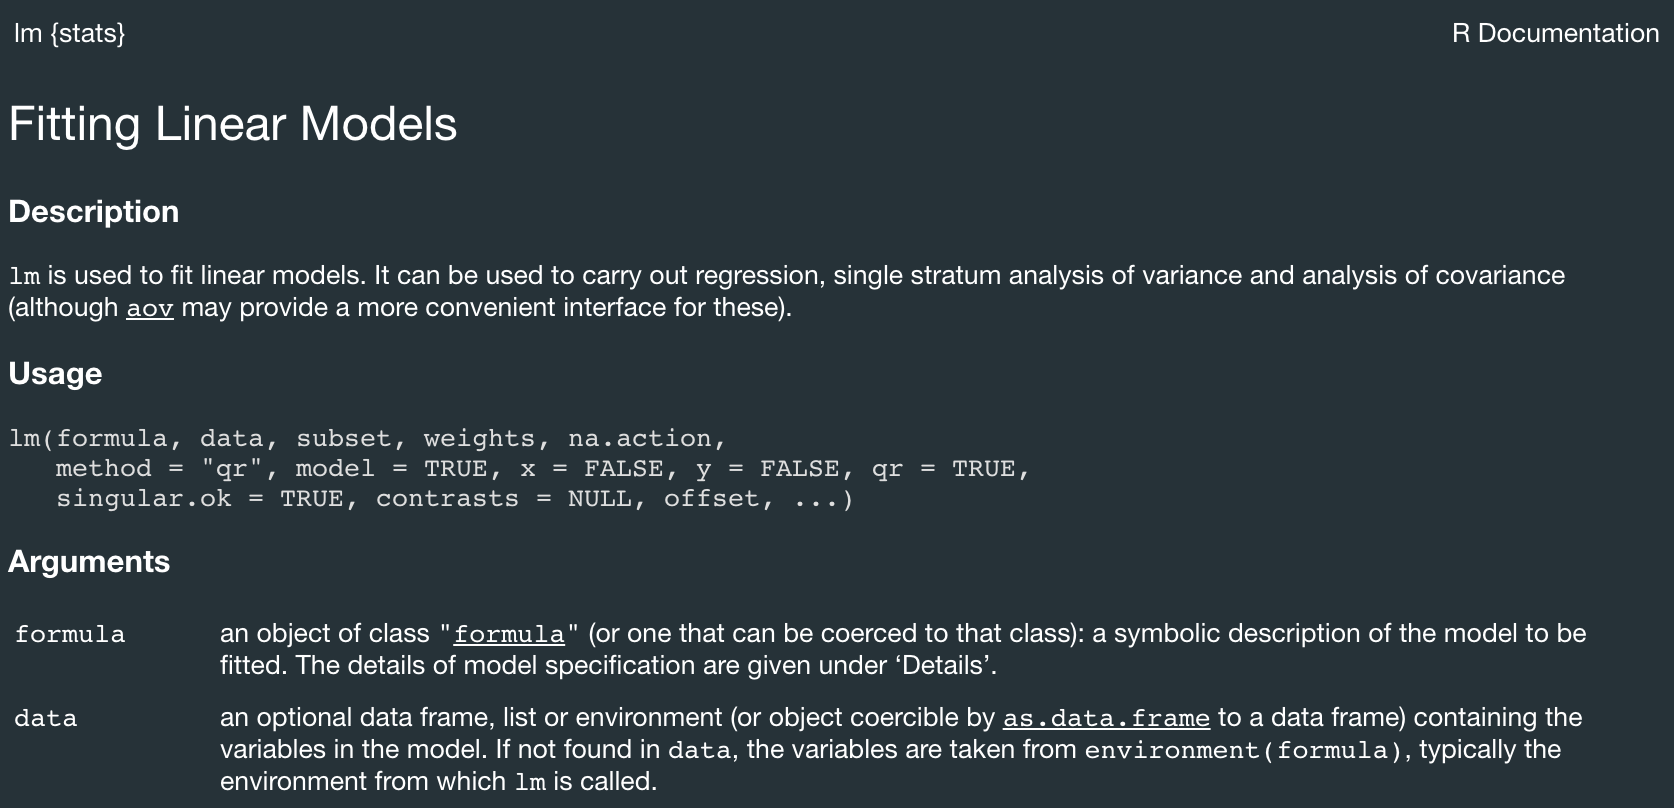 Excerpt from the documentation of the `lm` function.